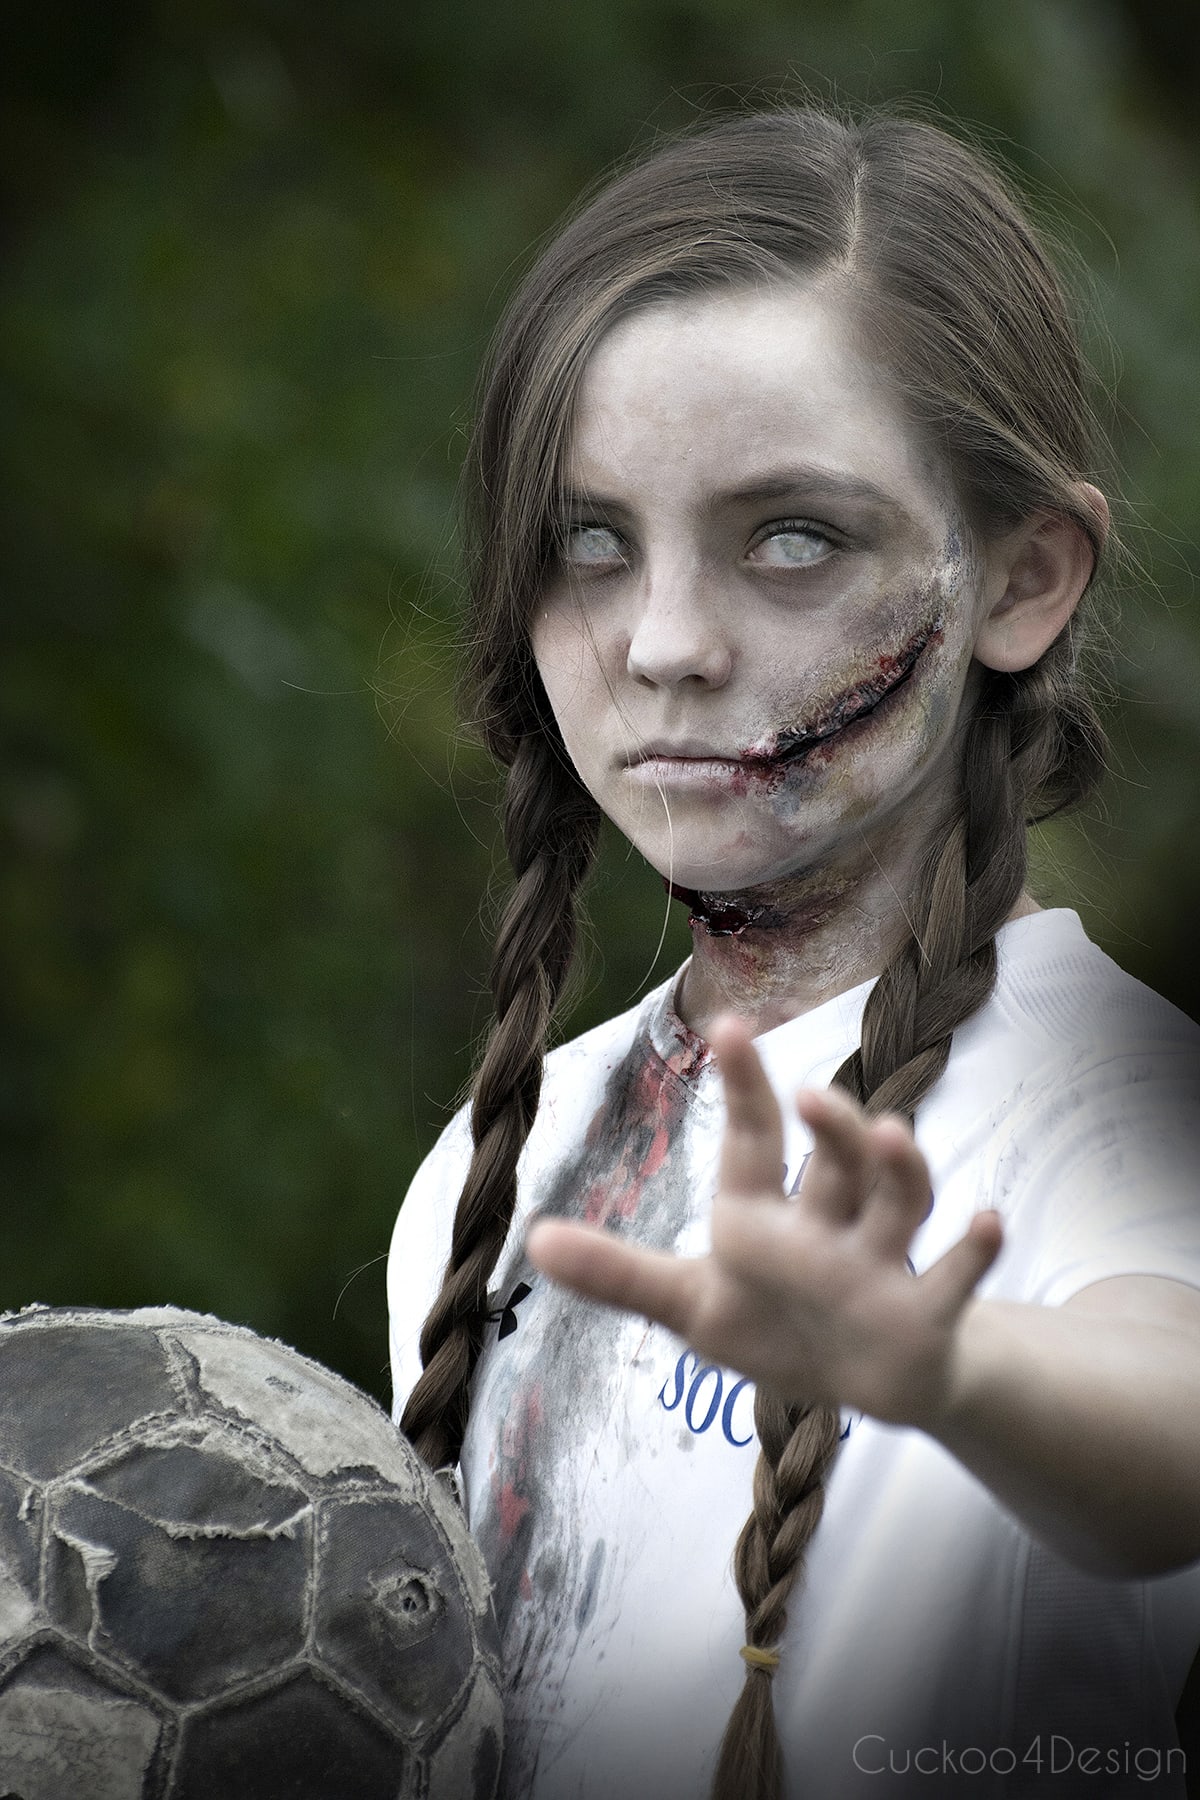 soccer zombie girl with bloddy DIY zombie makeup wounds and contacts